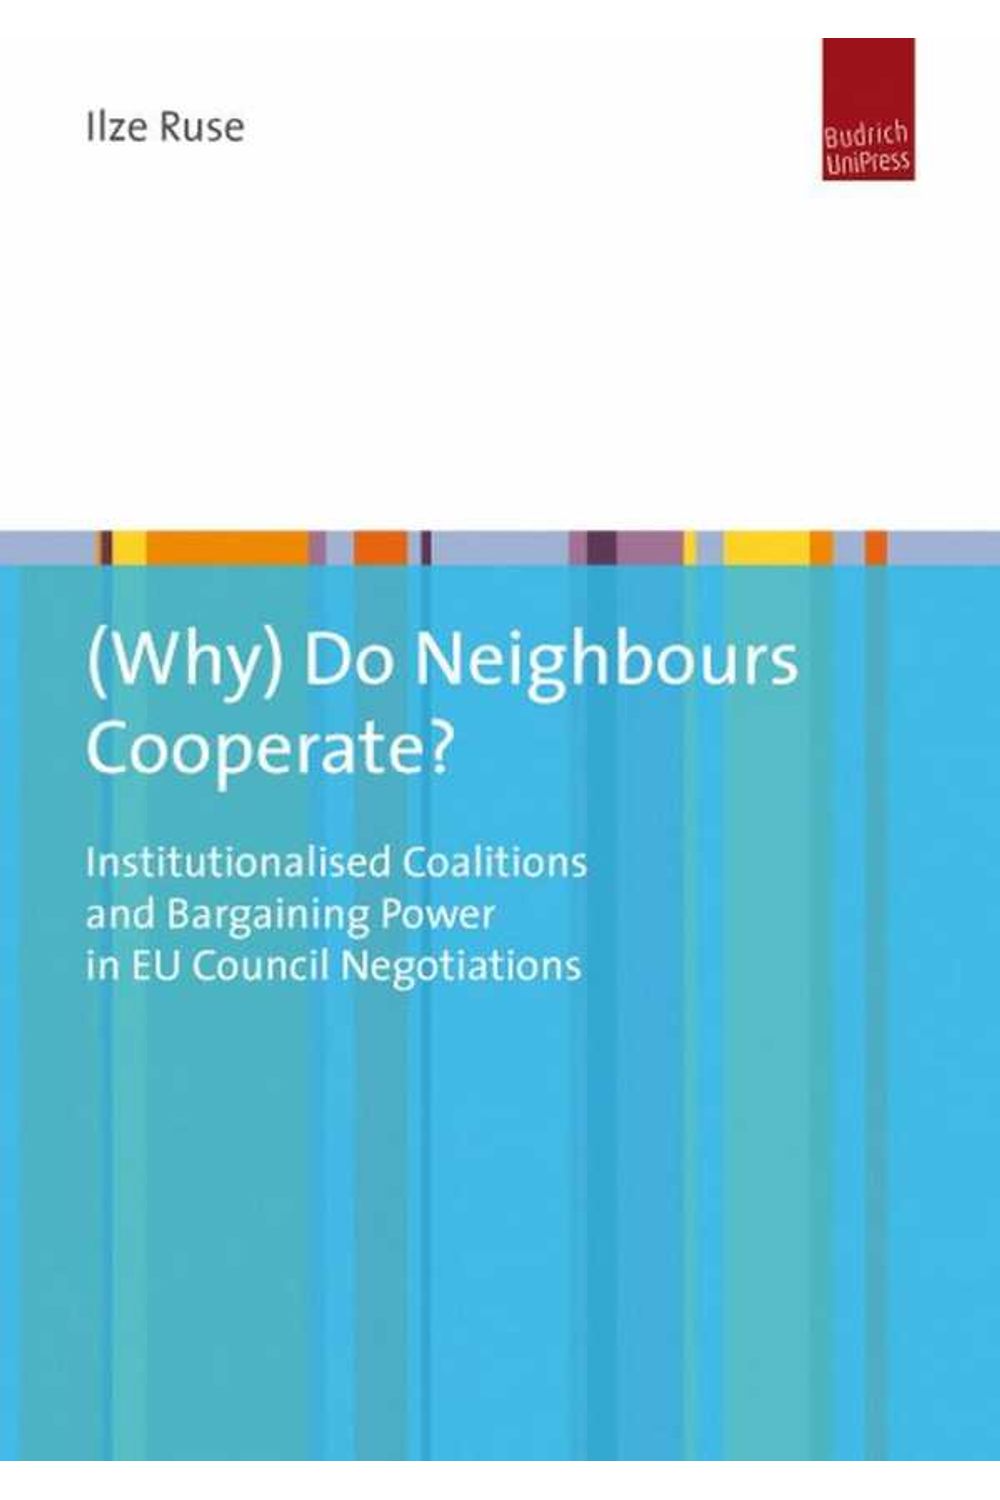 bw-why-do-neighbours-cooperate-budrich-unipress-9783863881849